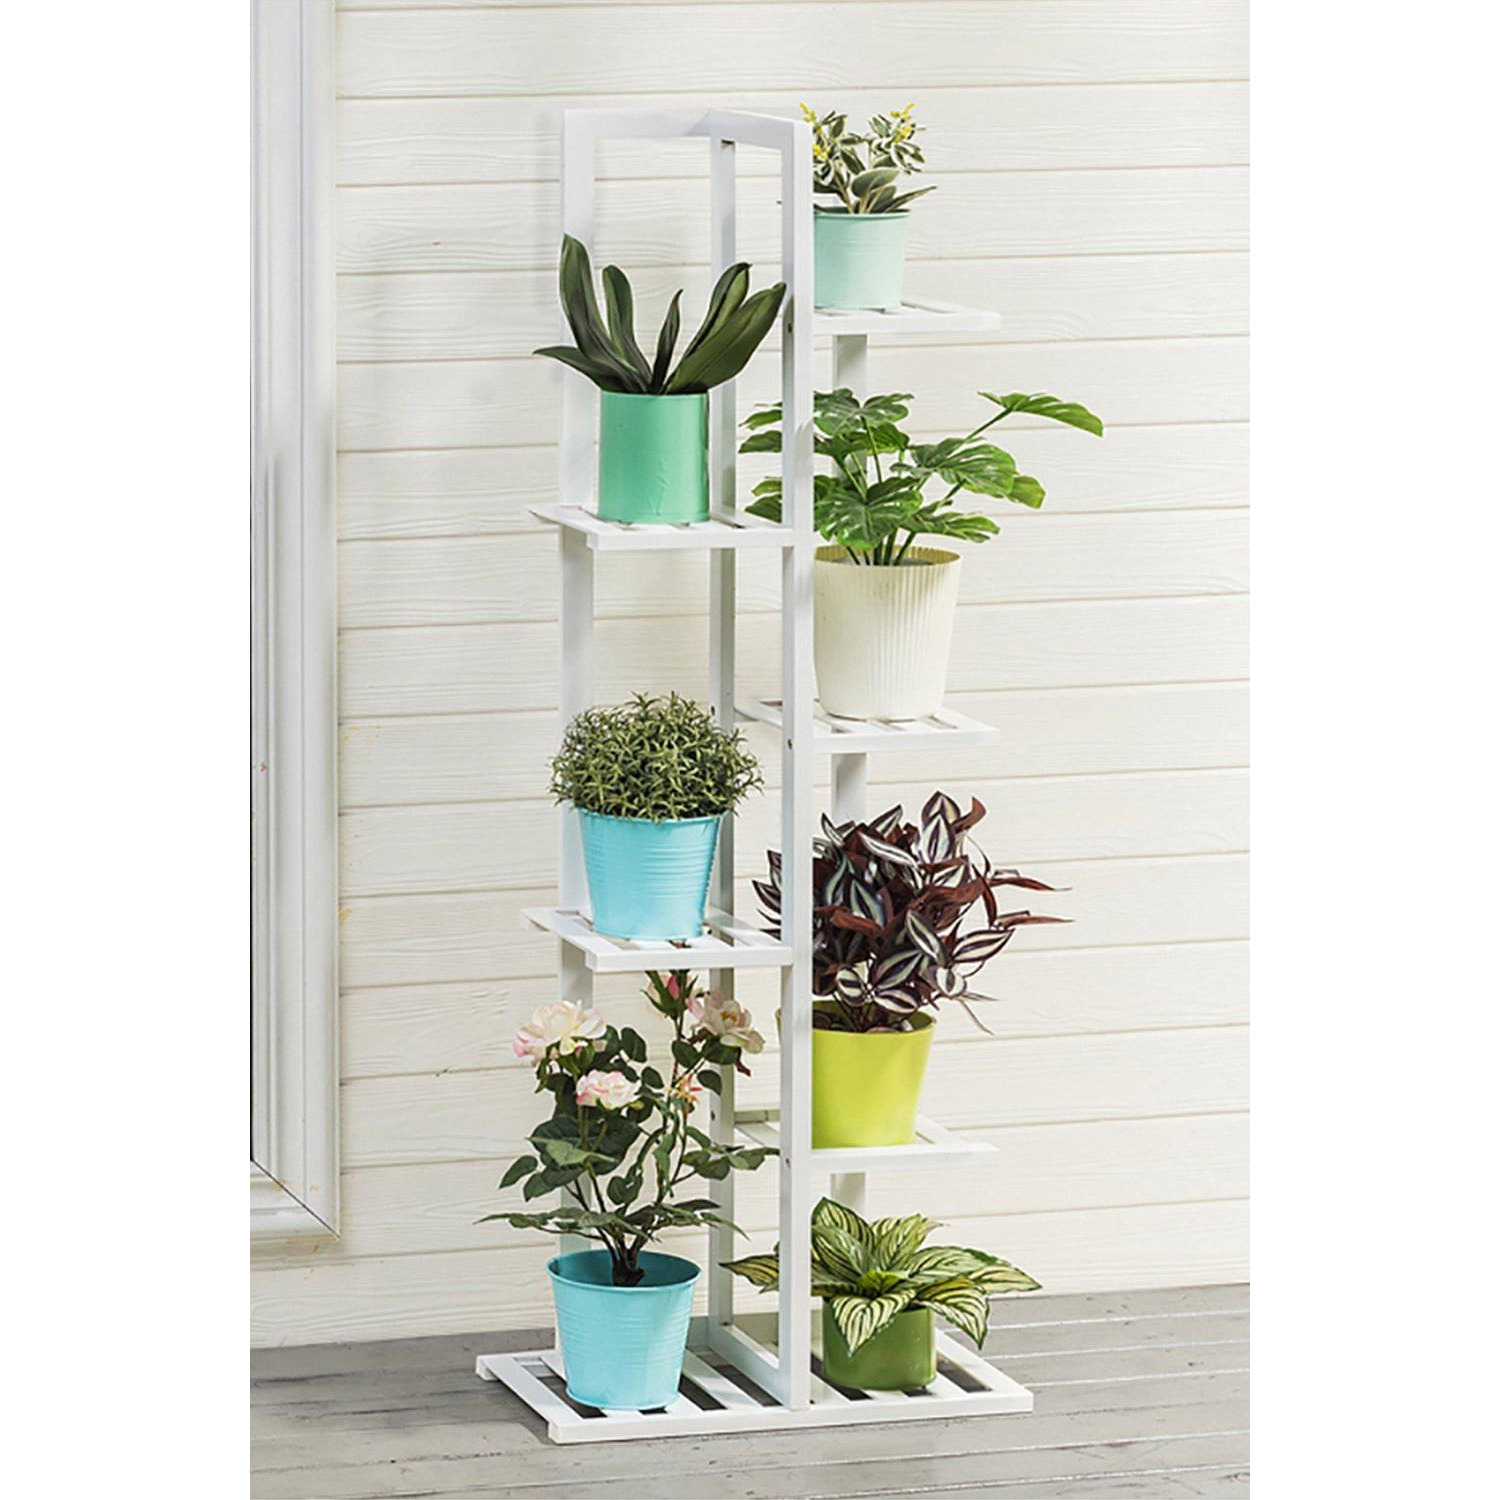 6 tier Alexander Free Form Multi Tiered Rubberwood Plant Stand - image 1